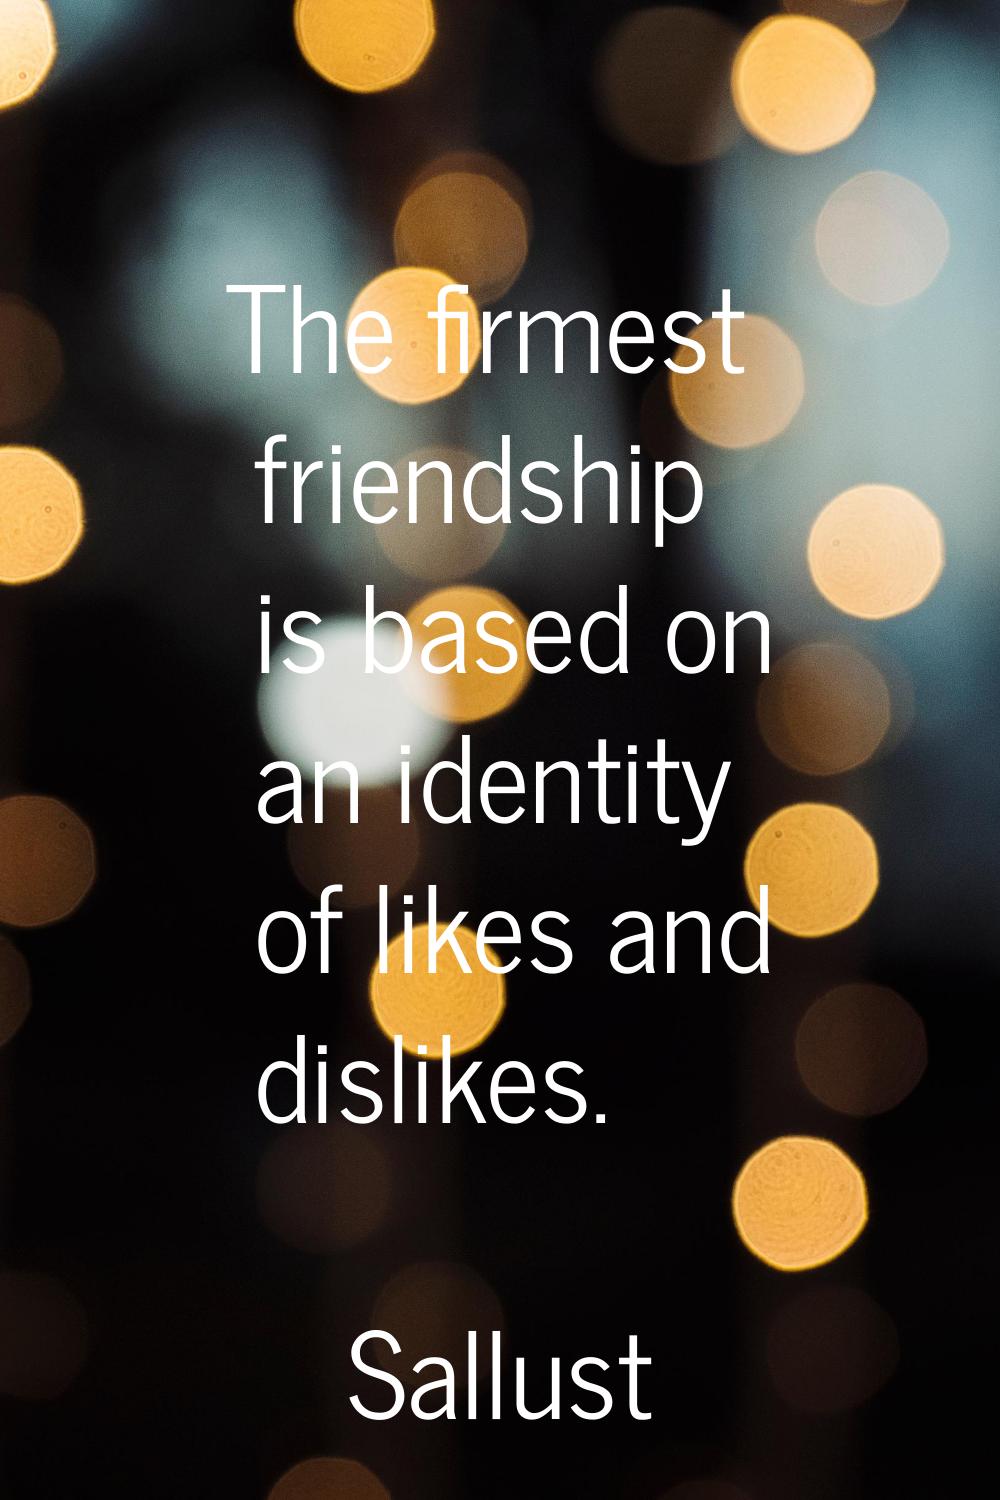 The firmest friendship is based on an identity of likes and dislikes.